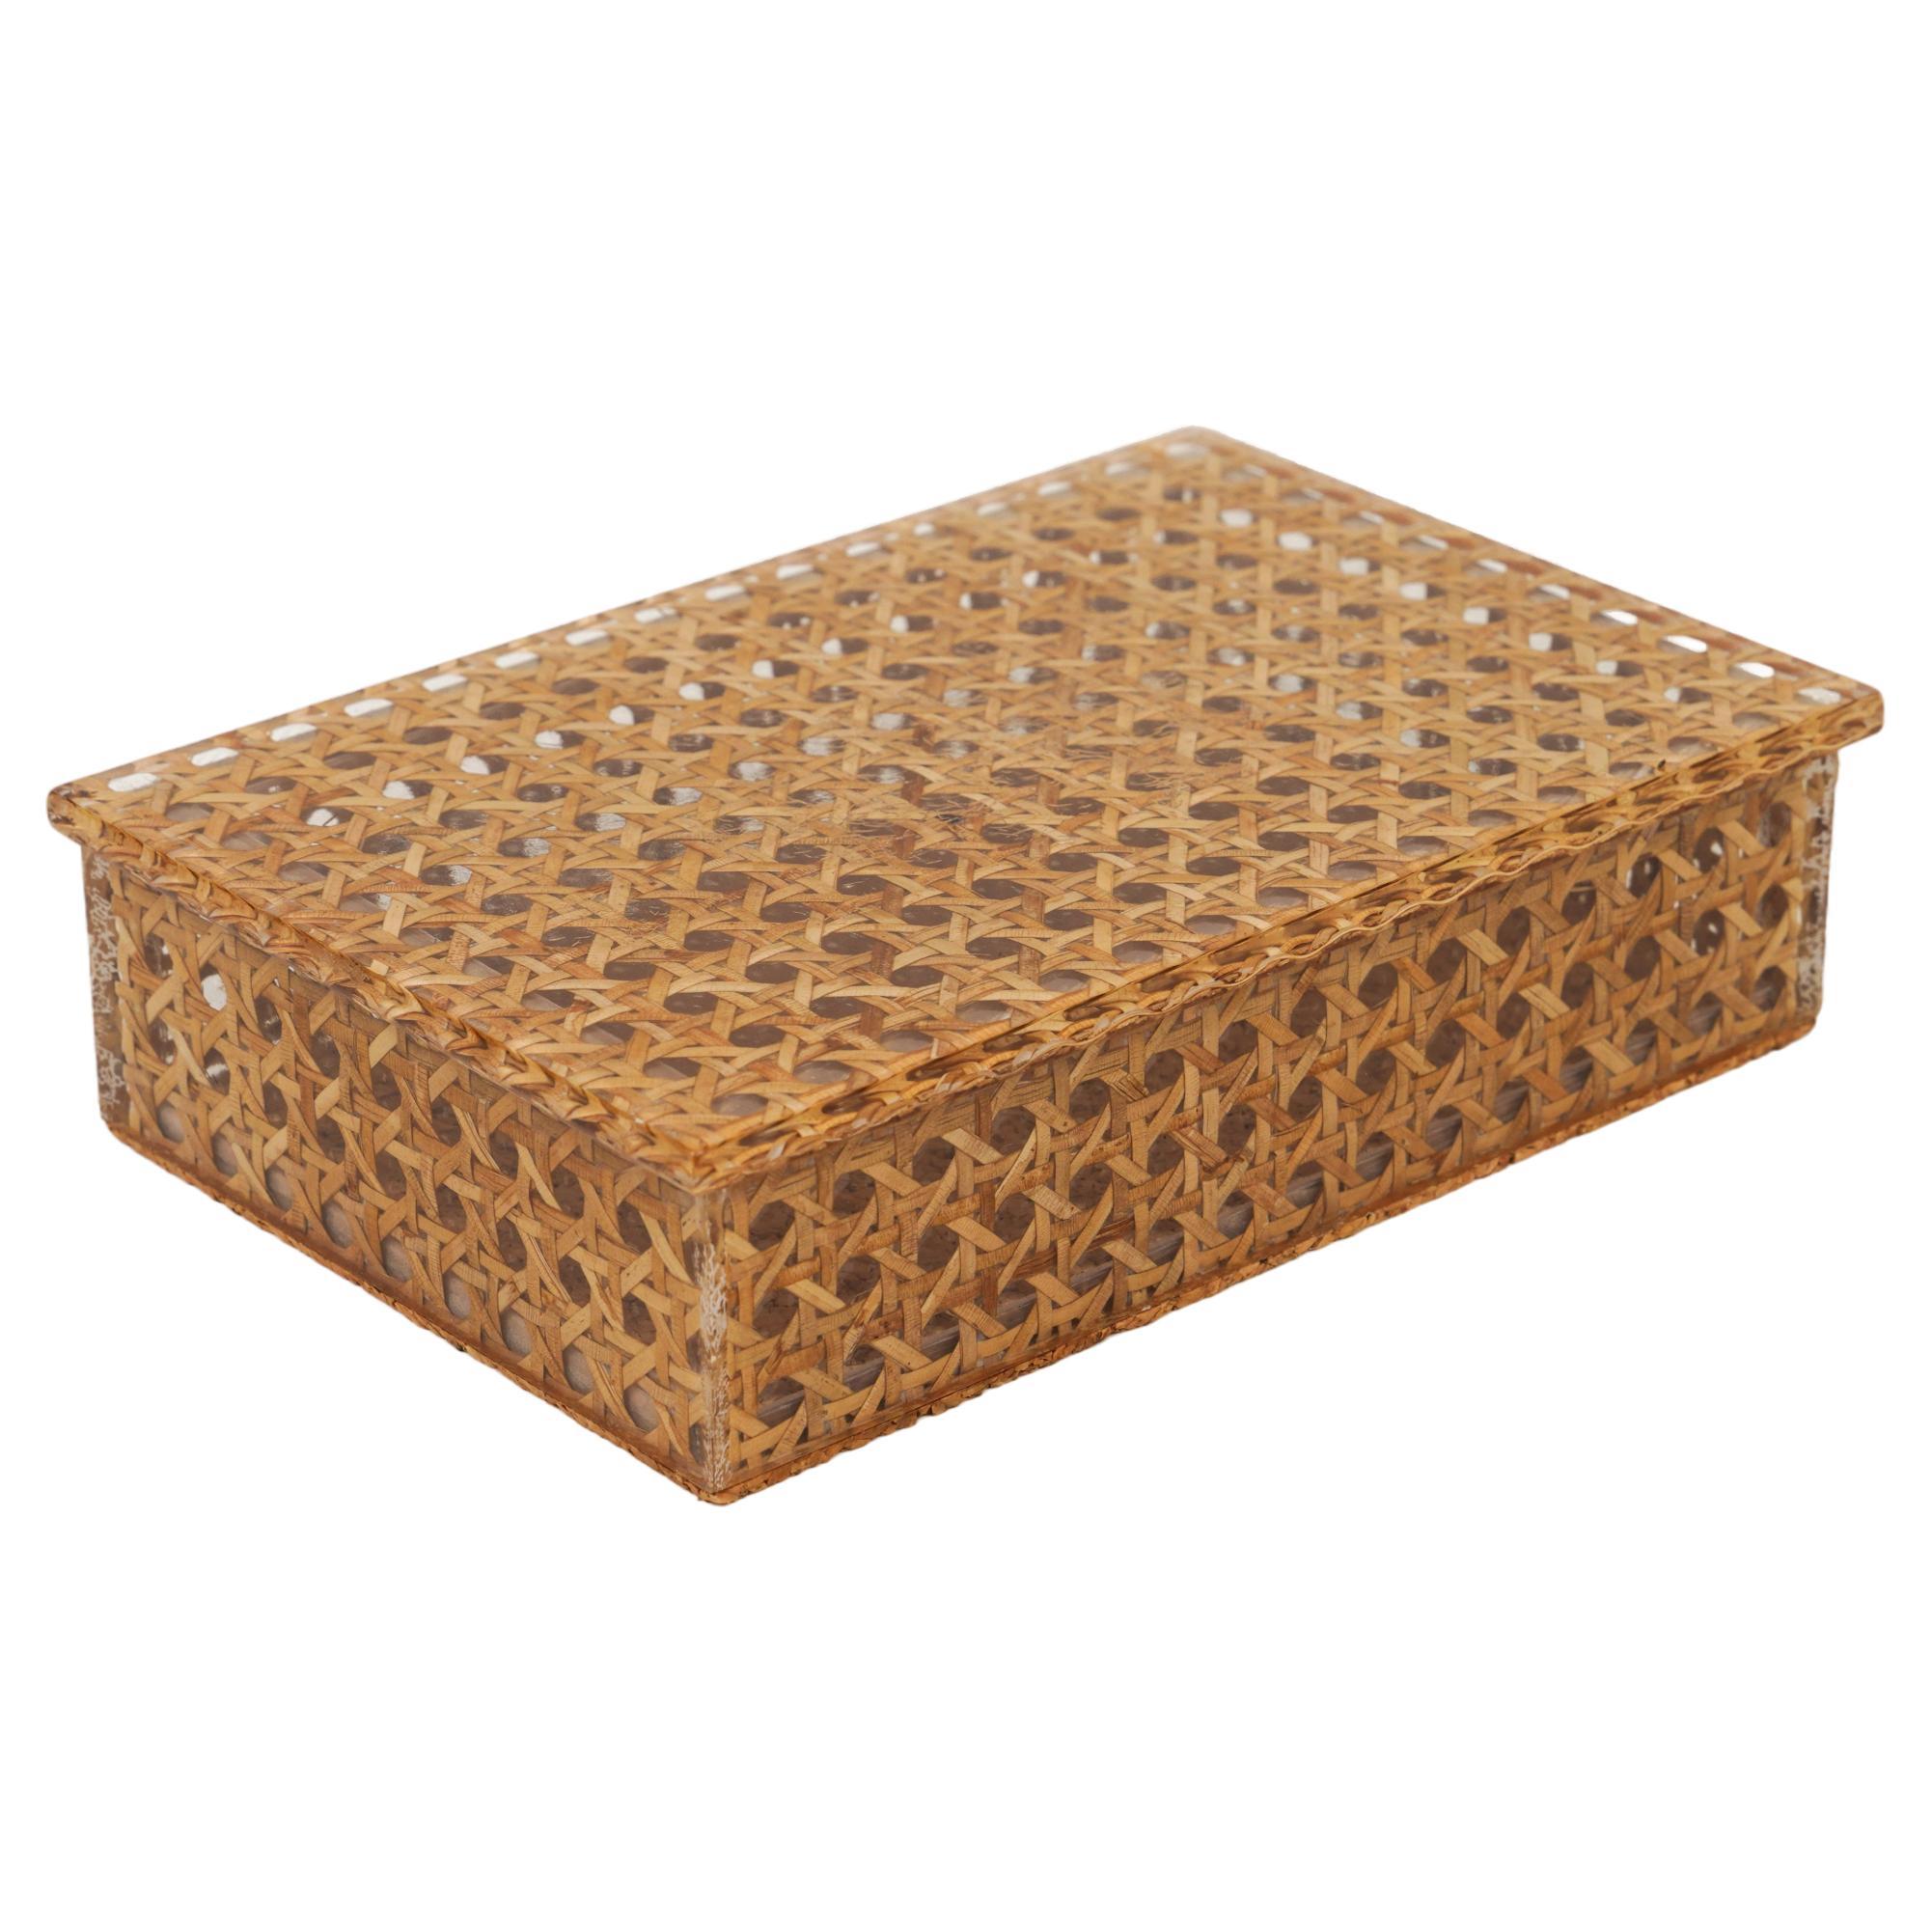 Midcentury Box in Rattan, Lucite and Cork Christian Dior Style, Italy 1970s